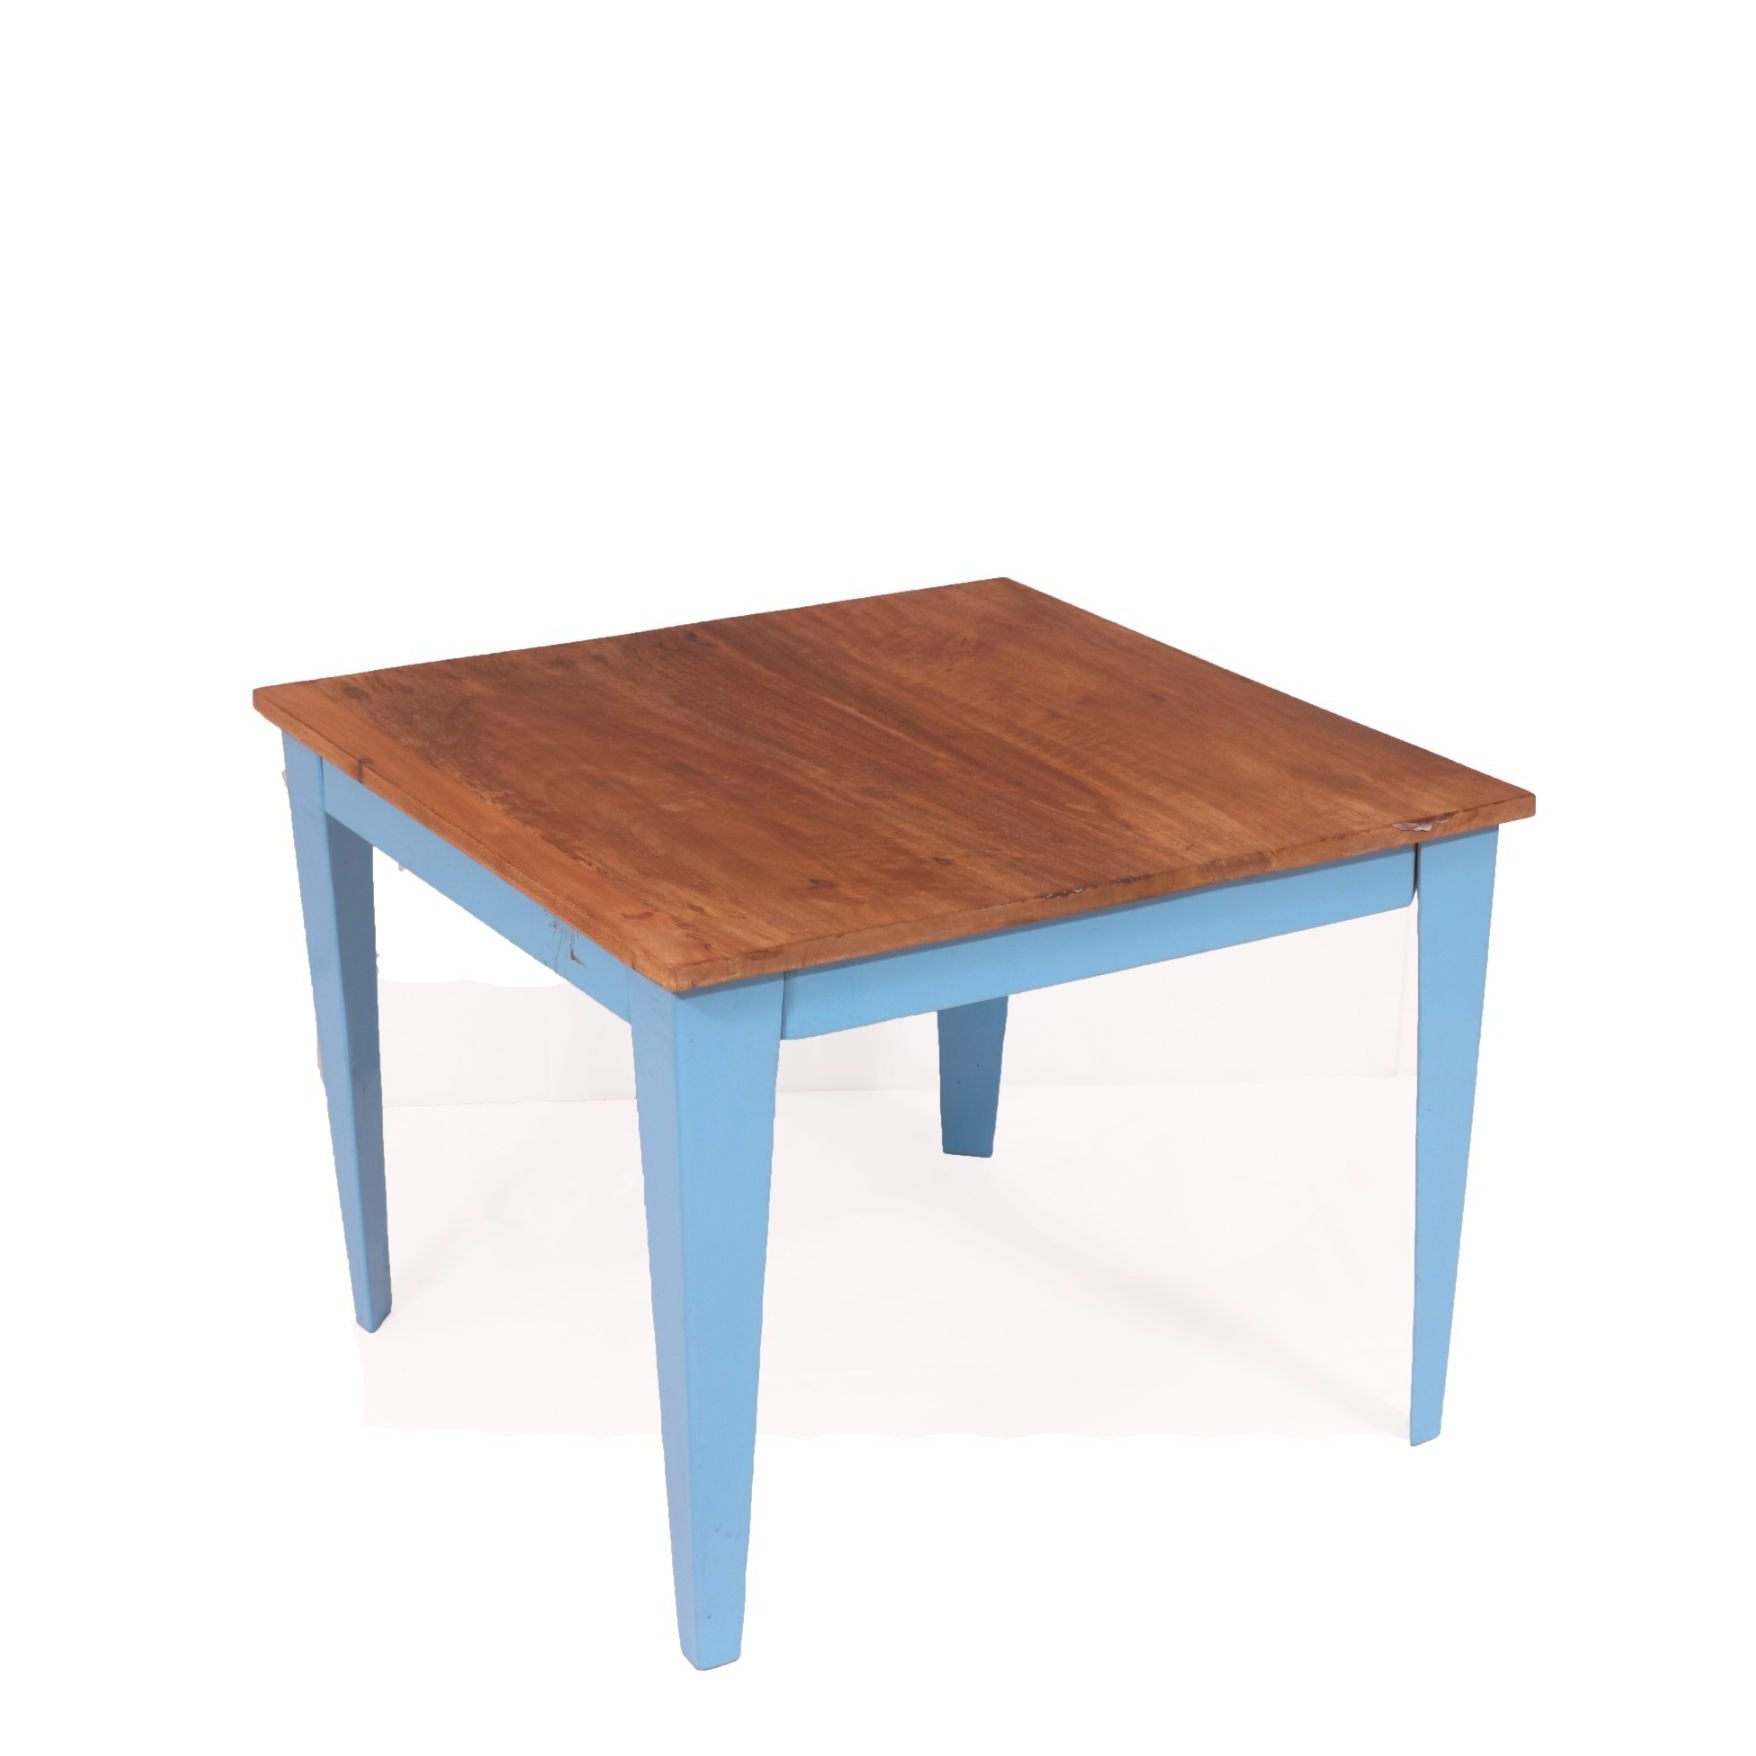 Whimsical Square Table Coffee Table